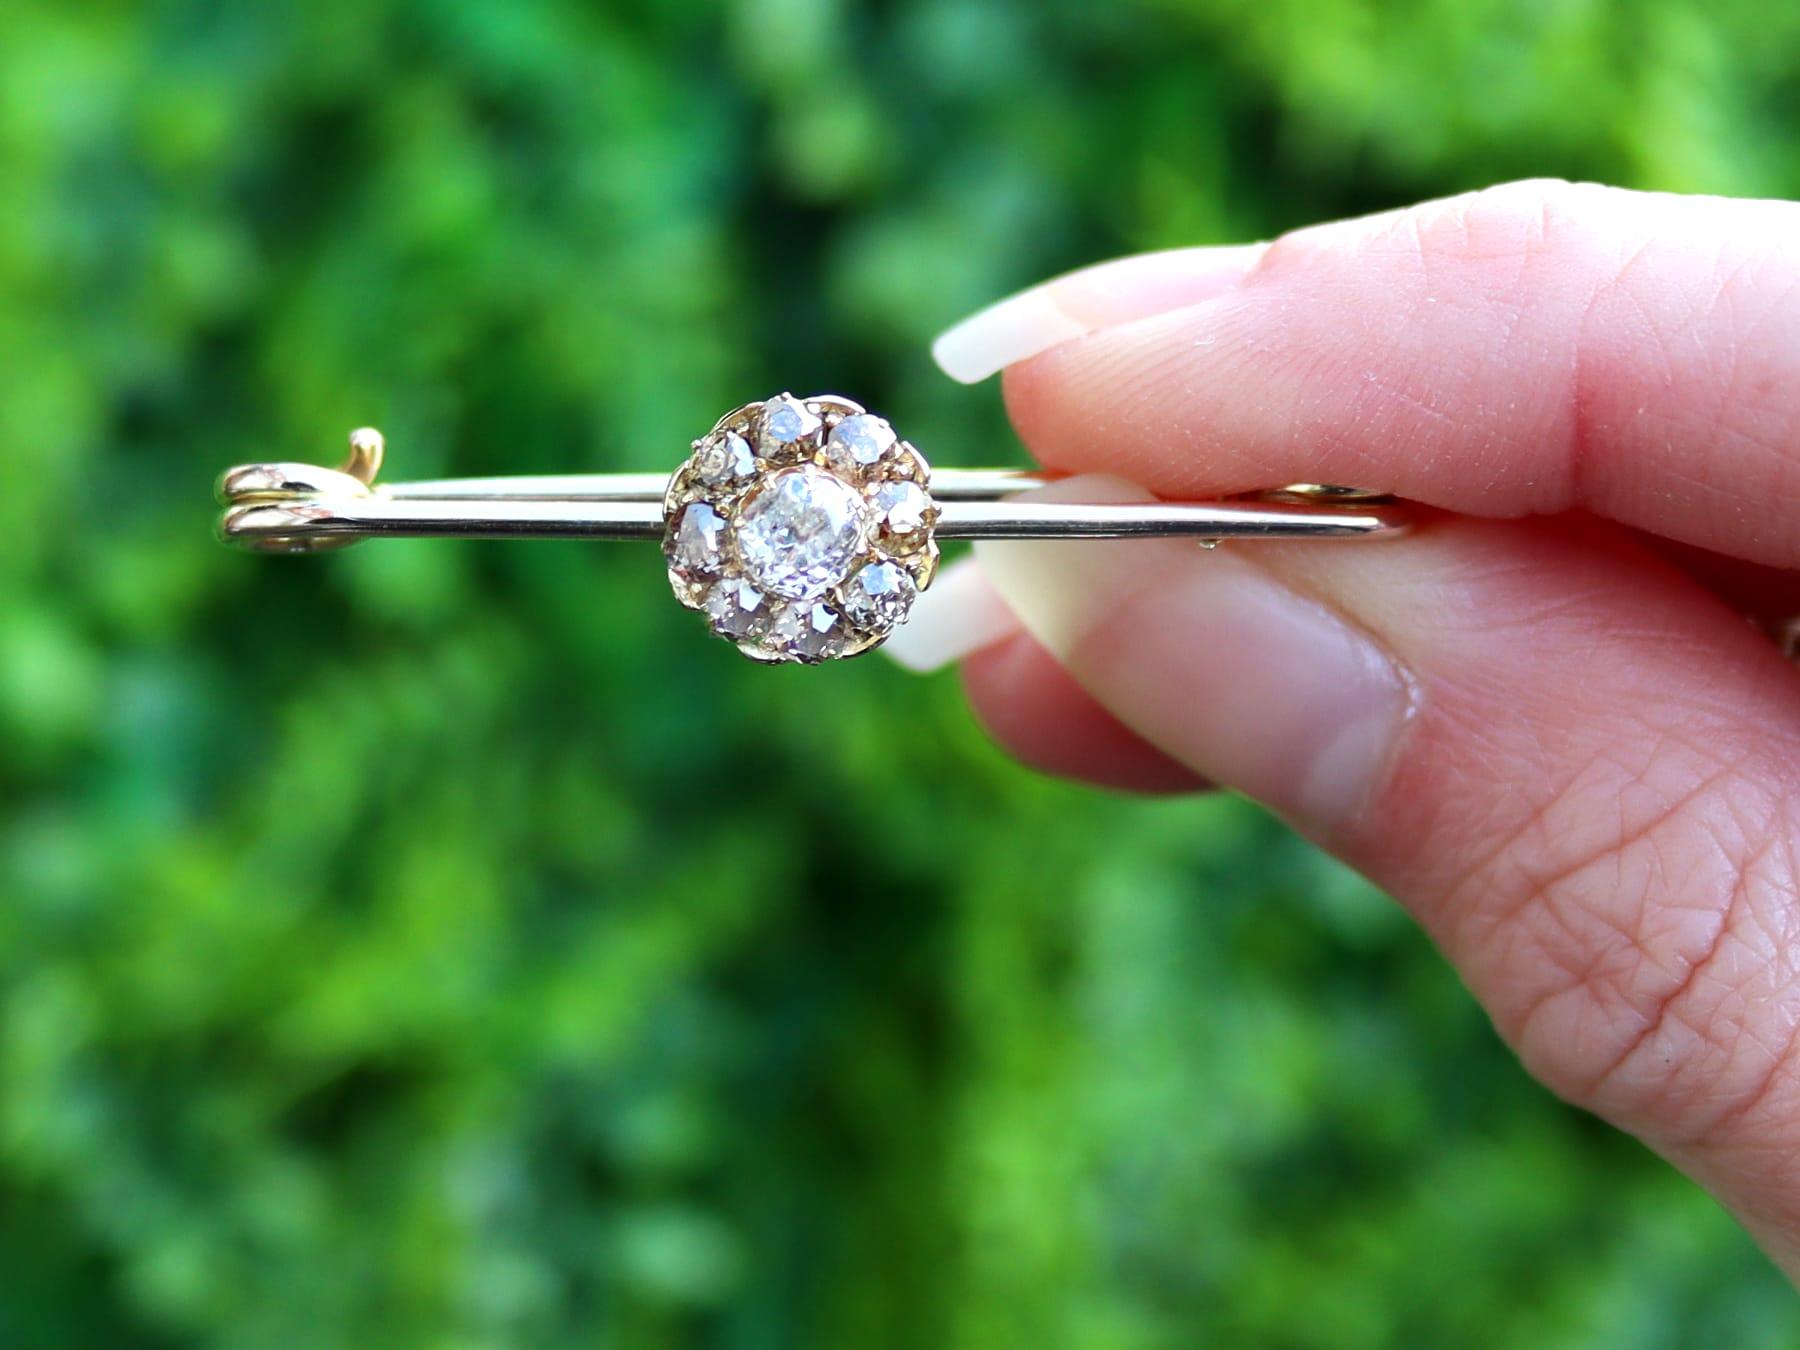 An impressive antique 0.56 carat diamond, 9 karat yellow gold bar brooch; part our antique jewelry and estate jewelry collections.

This antique late Victorian diamond brooch has been crafted in 9k yellow gold.

The antique bar brooch displays a